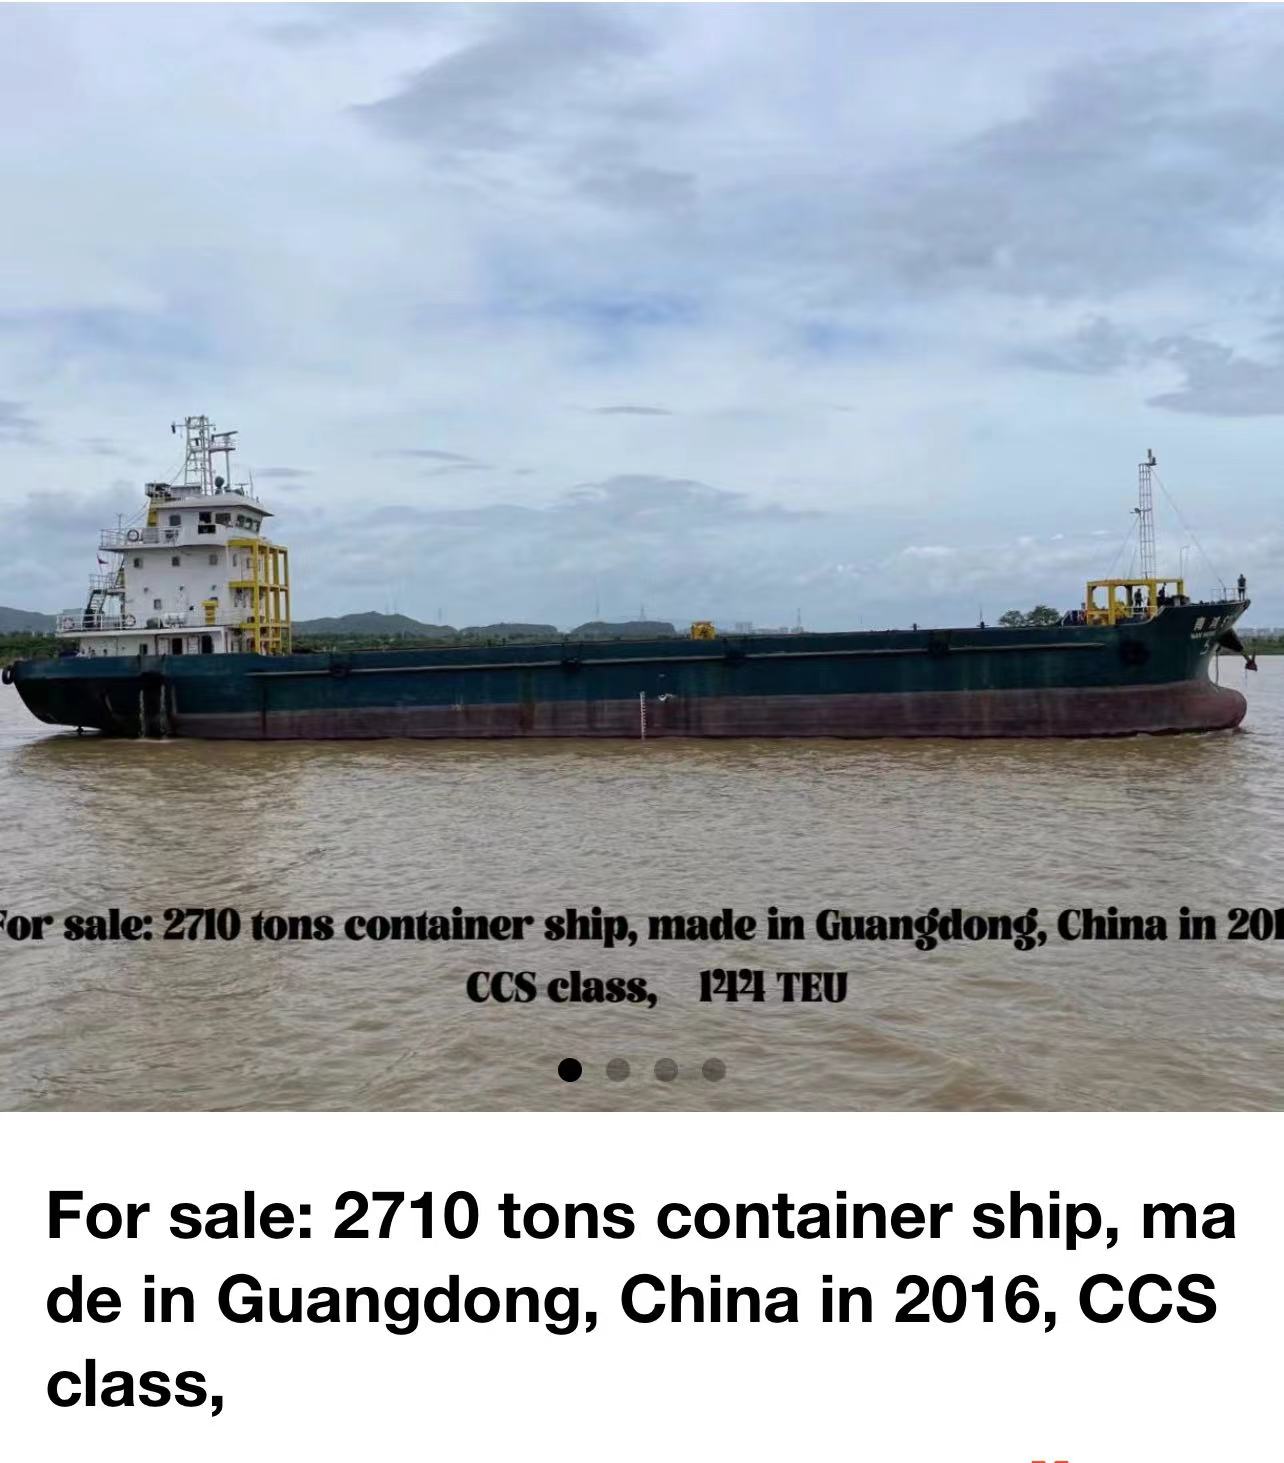 For sale: 2710 tons container ship, made in Guangdong, China in 2016, CCS class,  144TEU